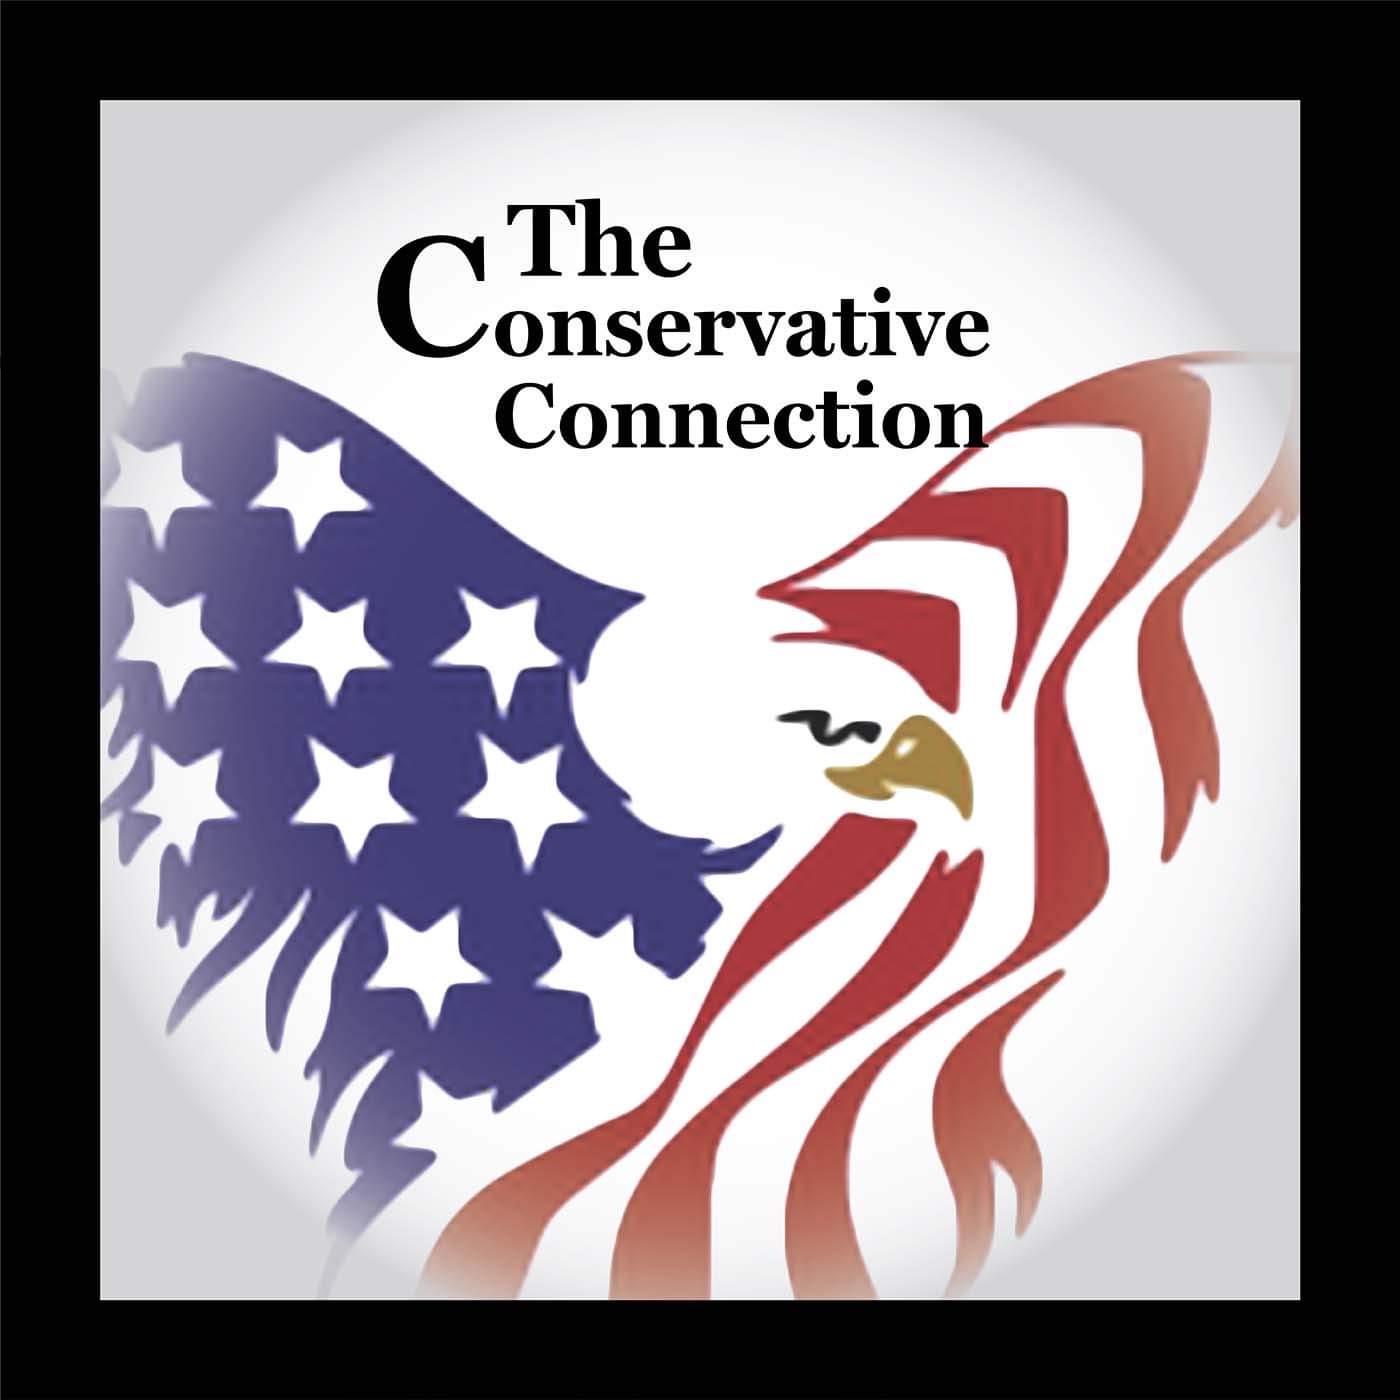 The Conservative Connection